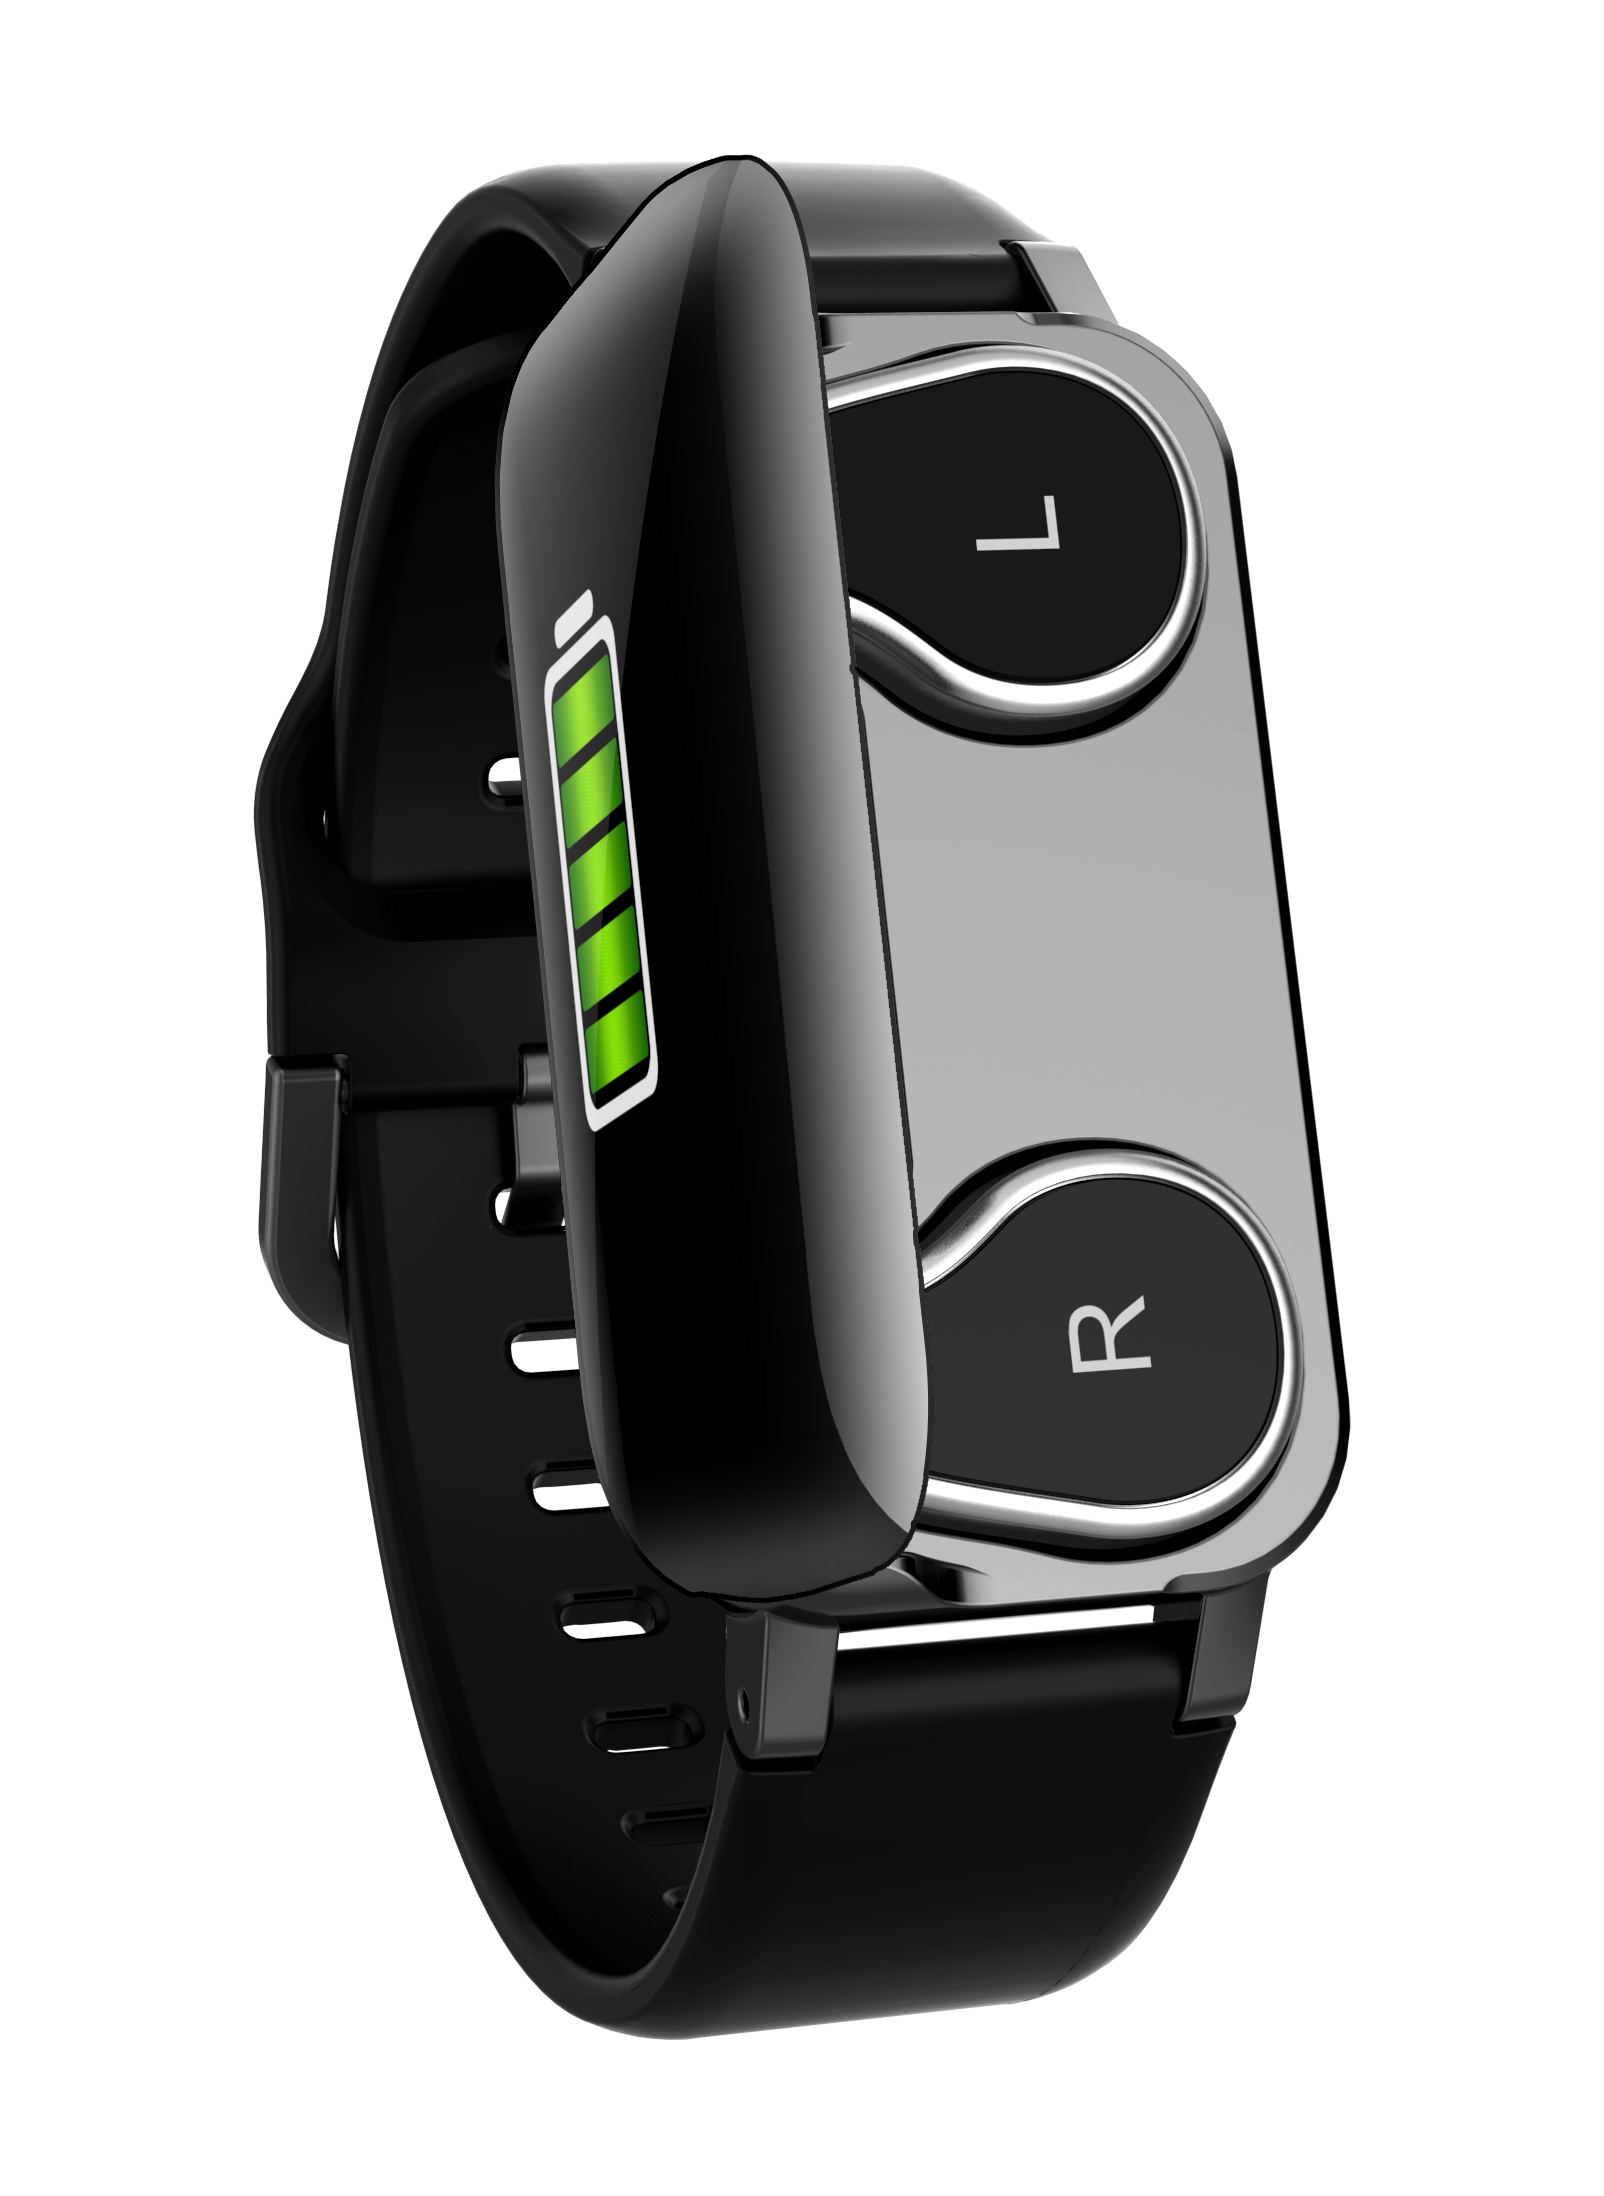 New Arrival Fitness Smart Watch Band with Earbuds HR BP